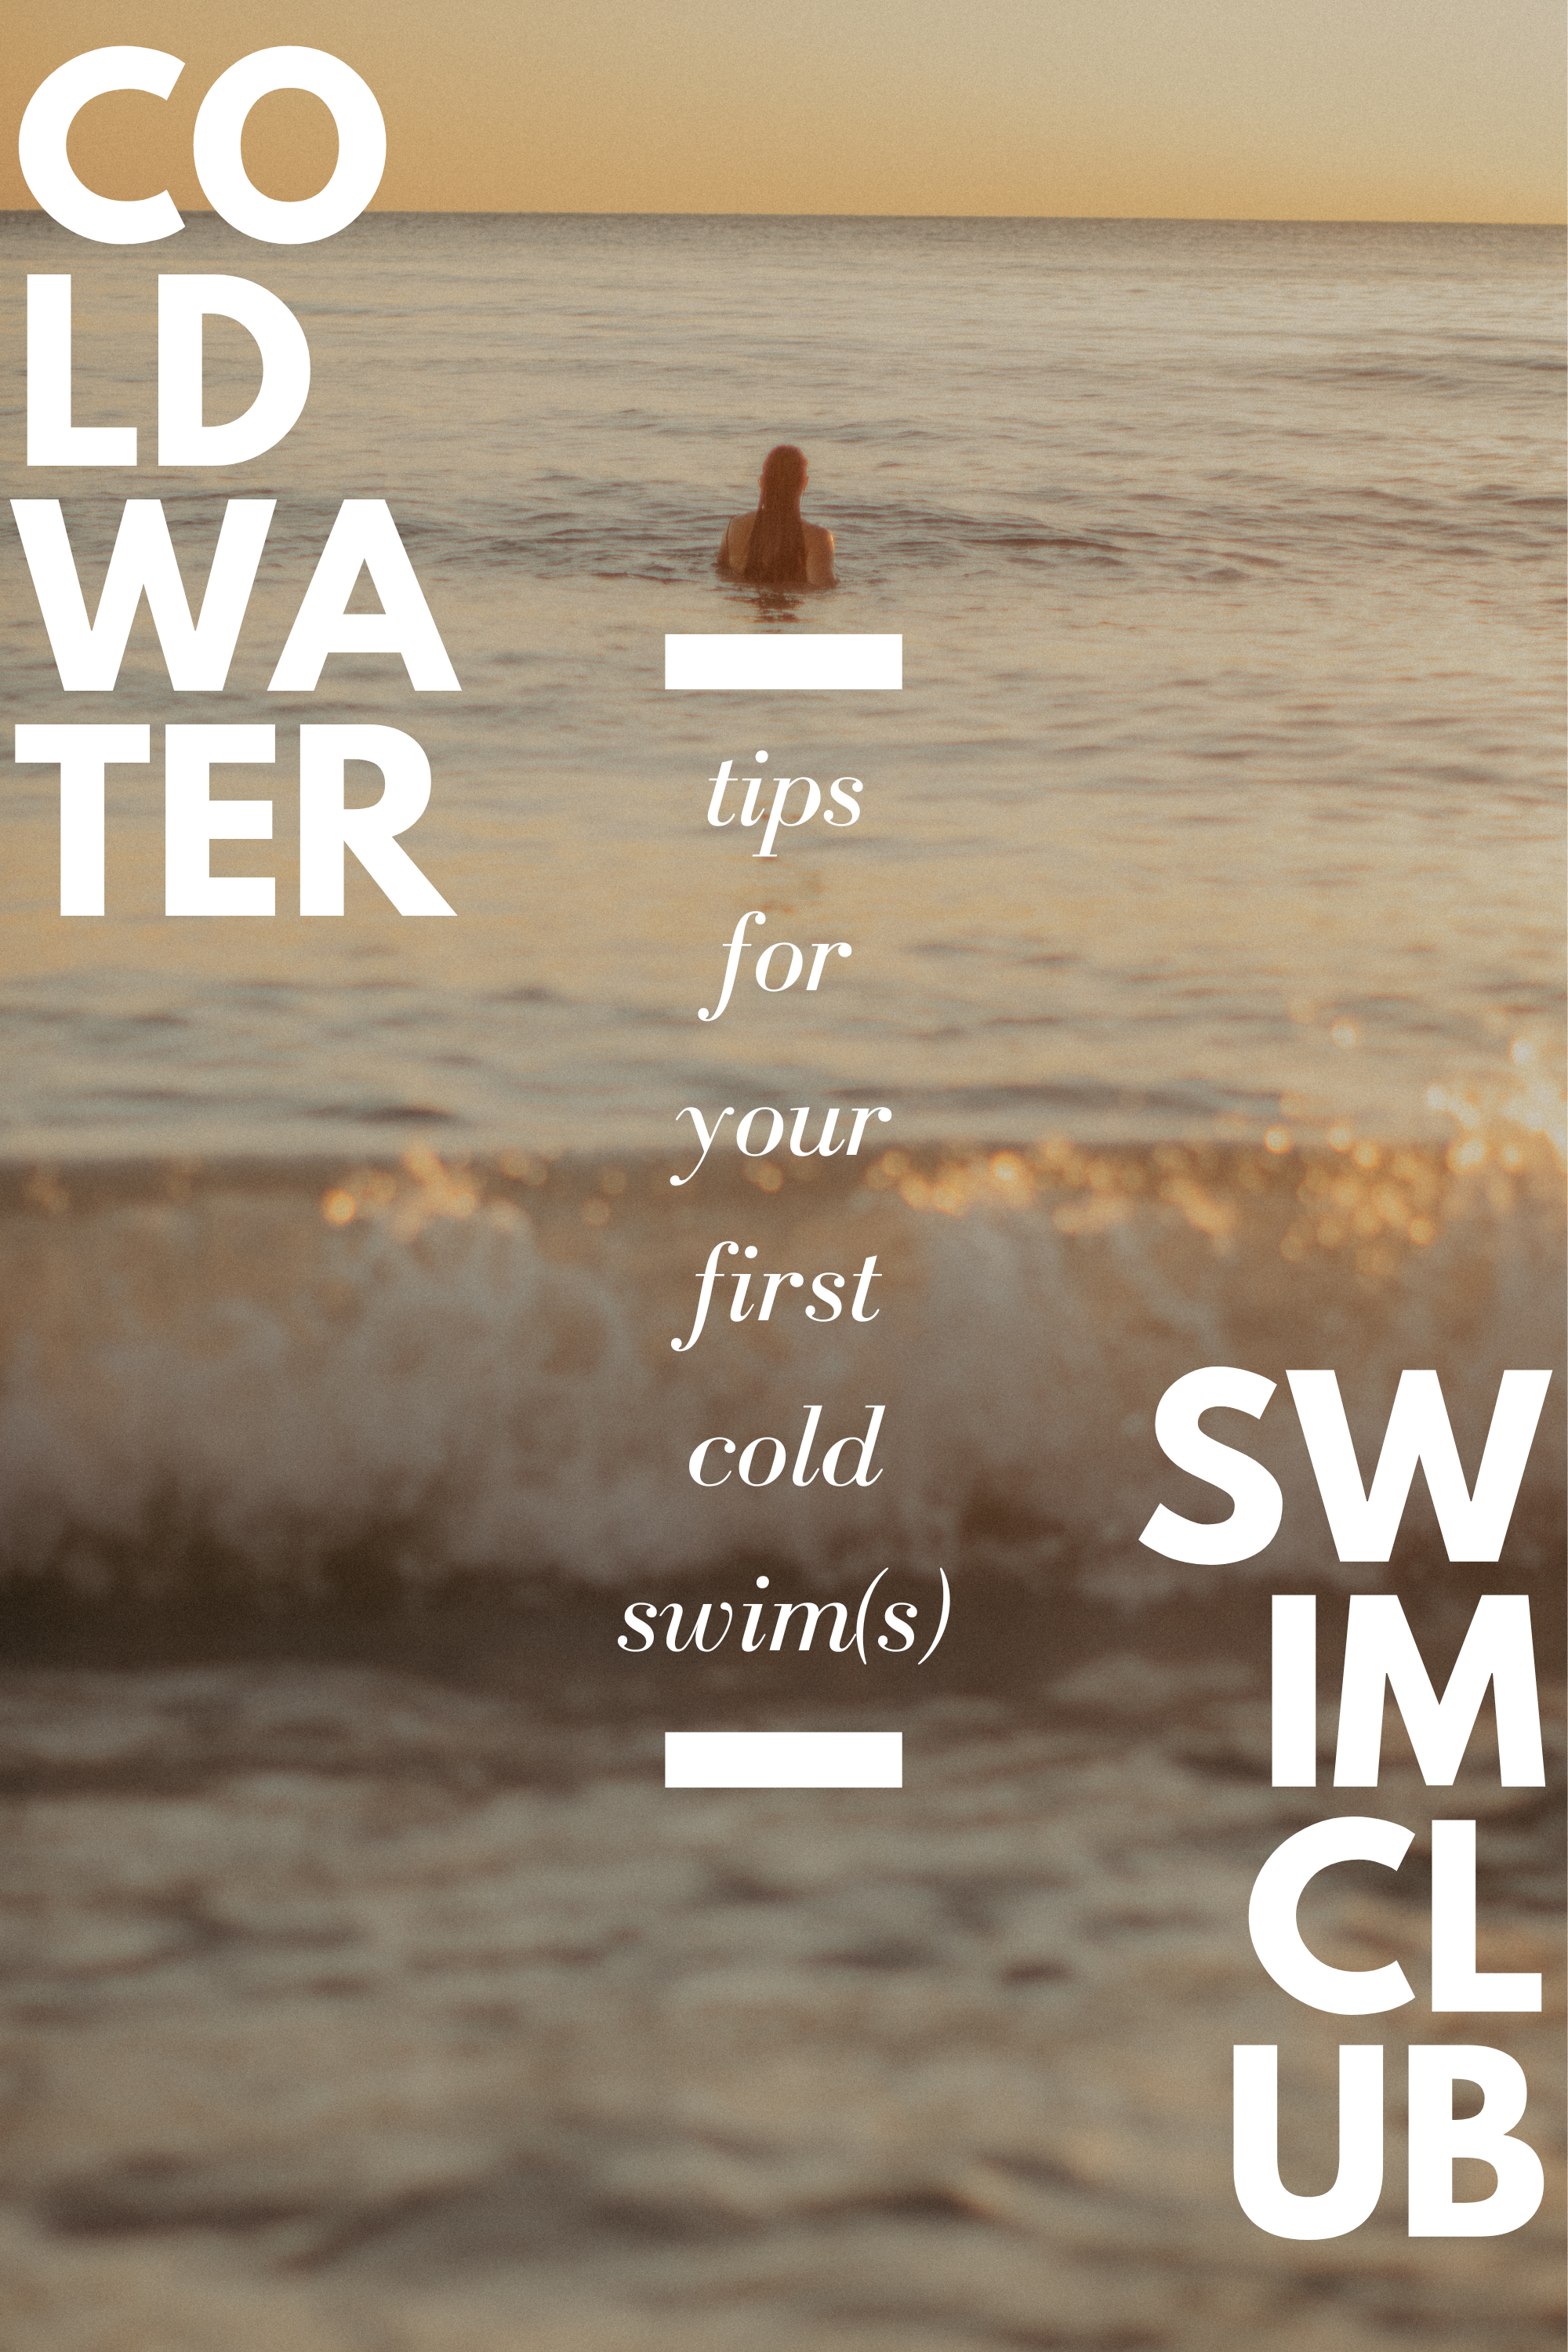 TIPS & PACKING FOR A COLD WATER SWIM